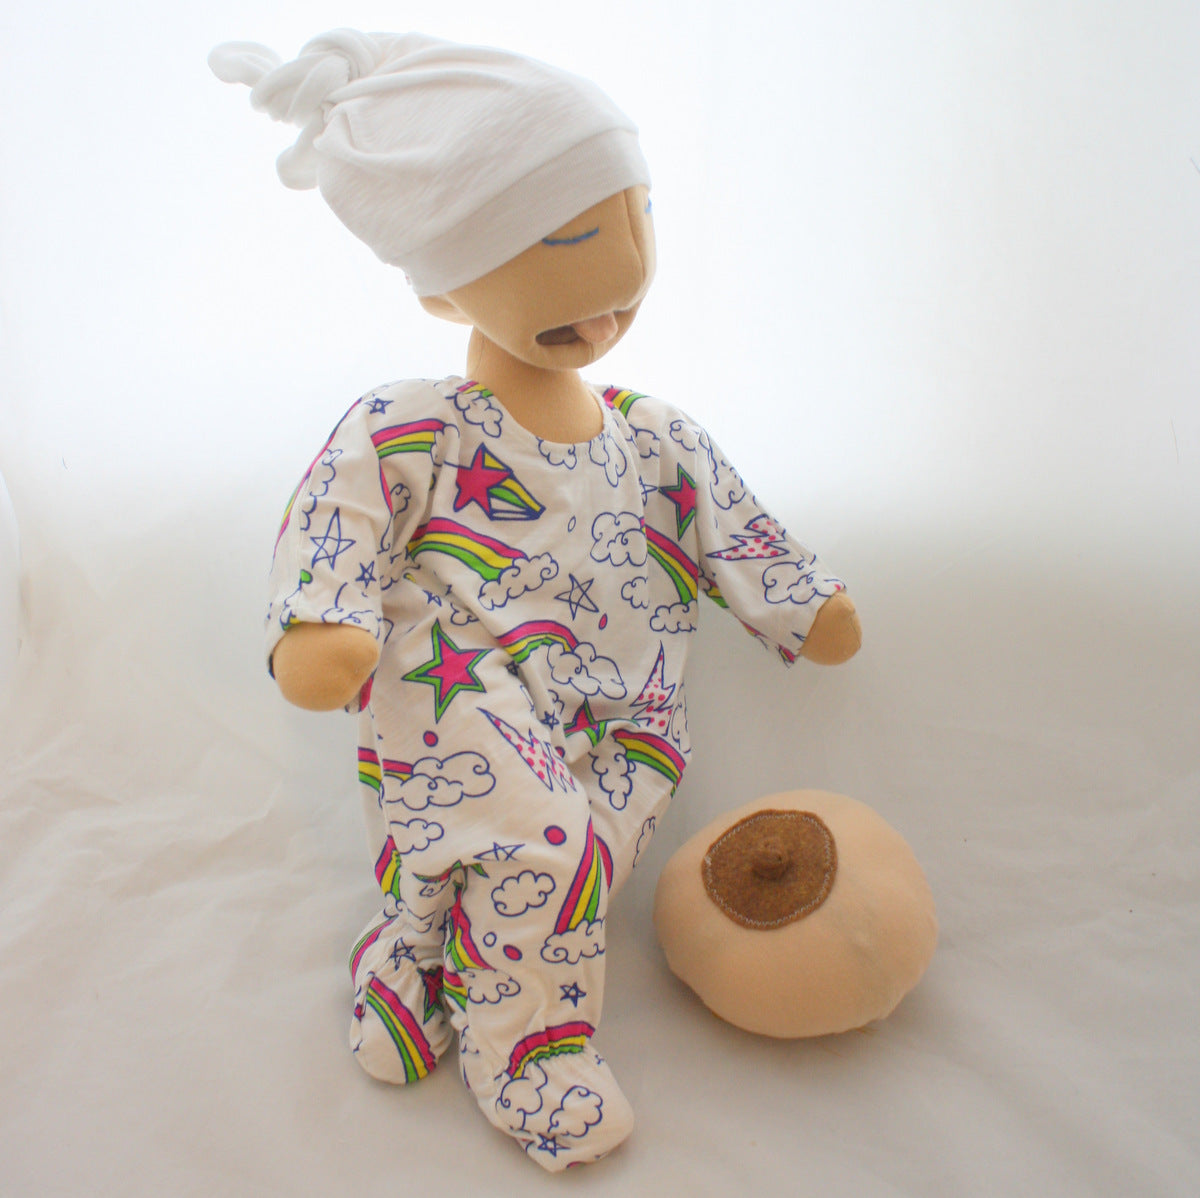 Our new Breastfeeding Baby Doll Puppet is here!